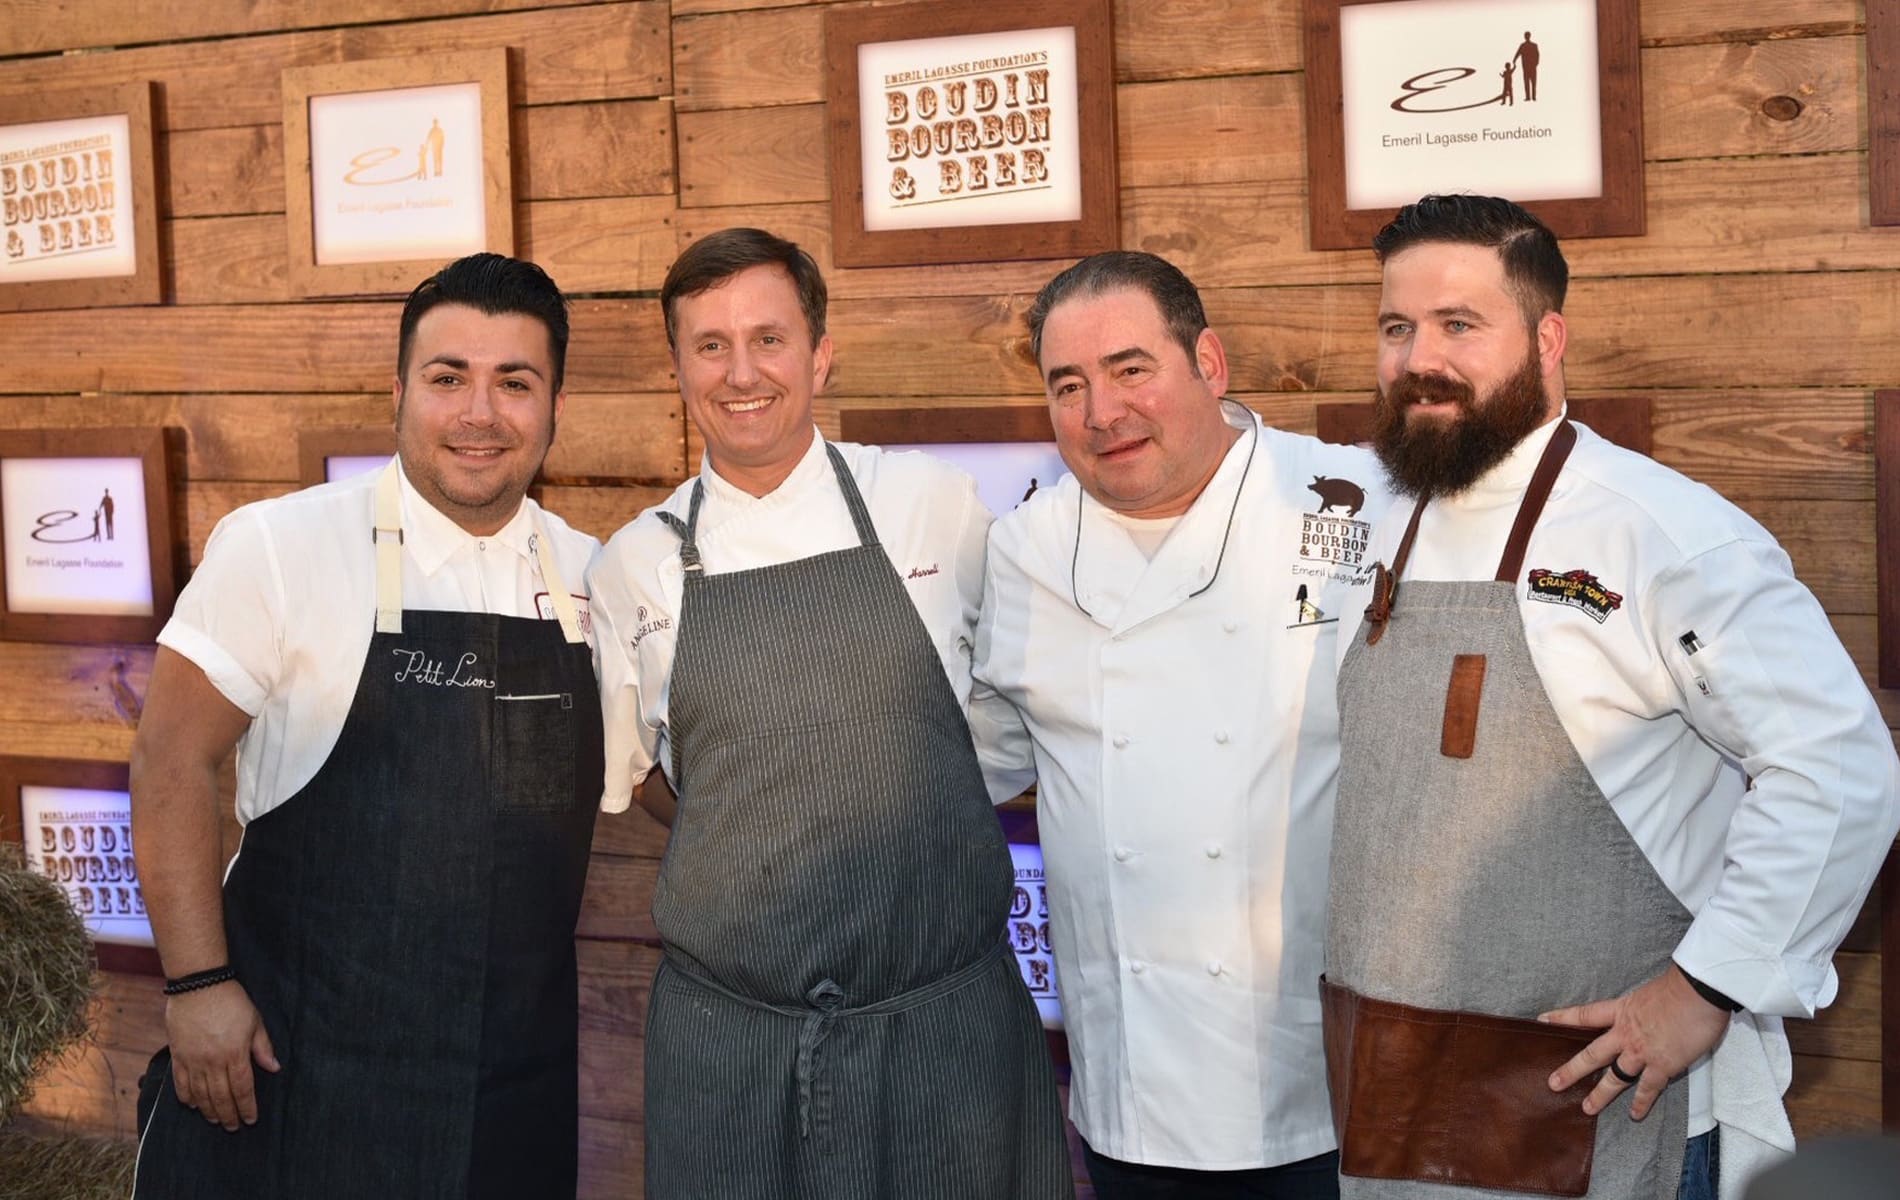 Three male chefs pose with Emeril Lagasse at the Boudin Bourbon & Beer 2016 charity event in New Orleans, Louisiana